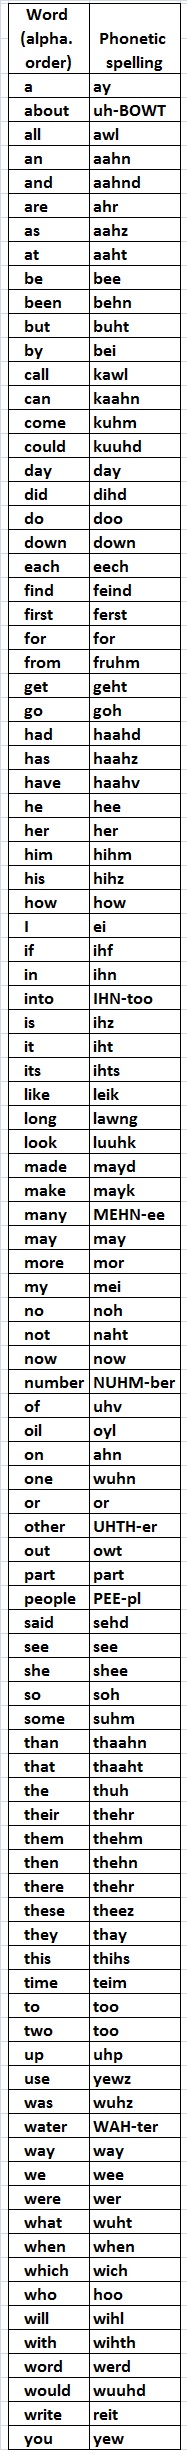 Phonetic spellings of 100 most common words